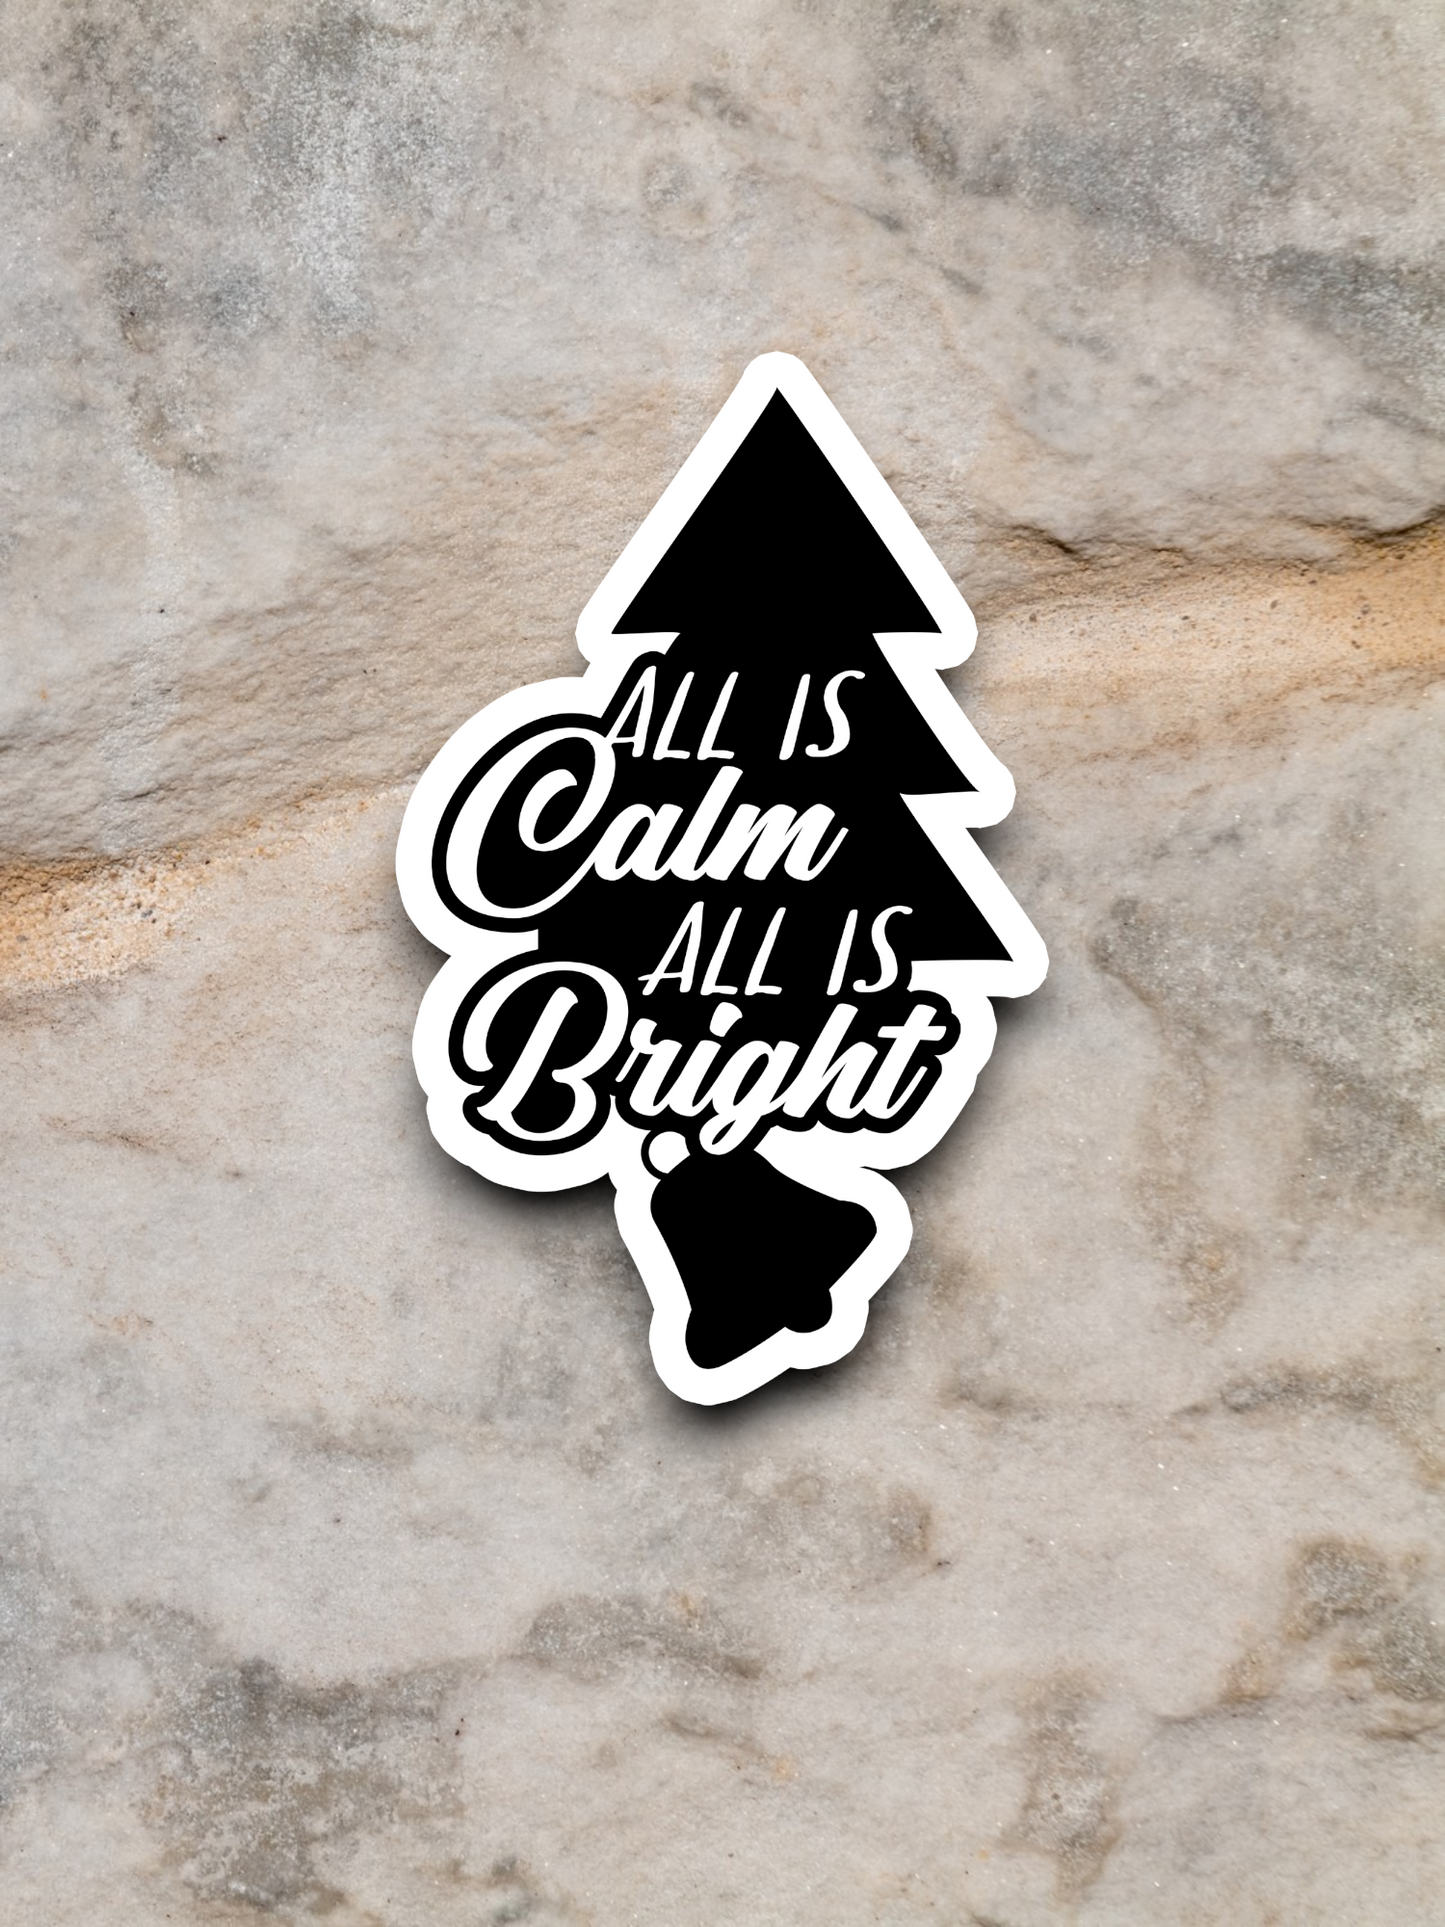 All is Calm All is Bright Version 4 - Holiday Sticker